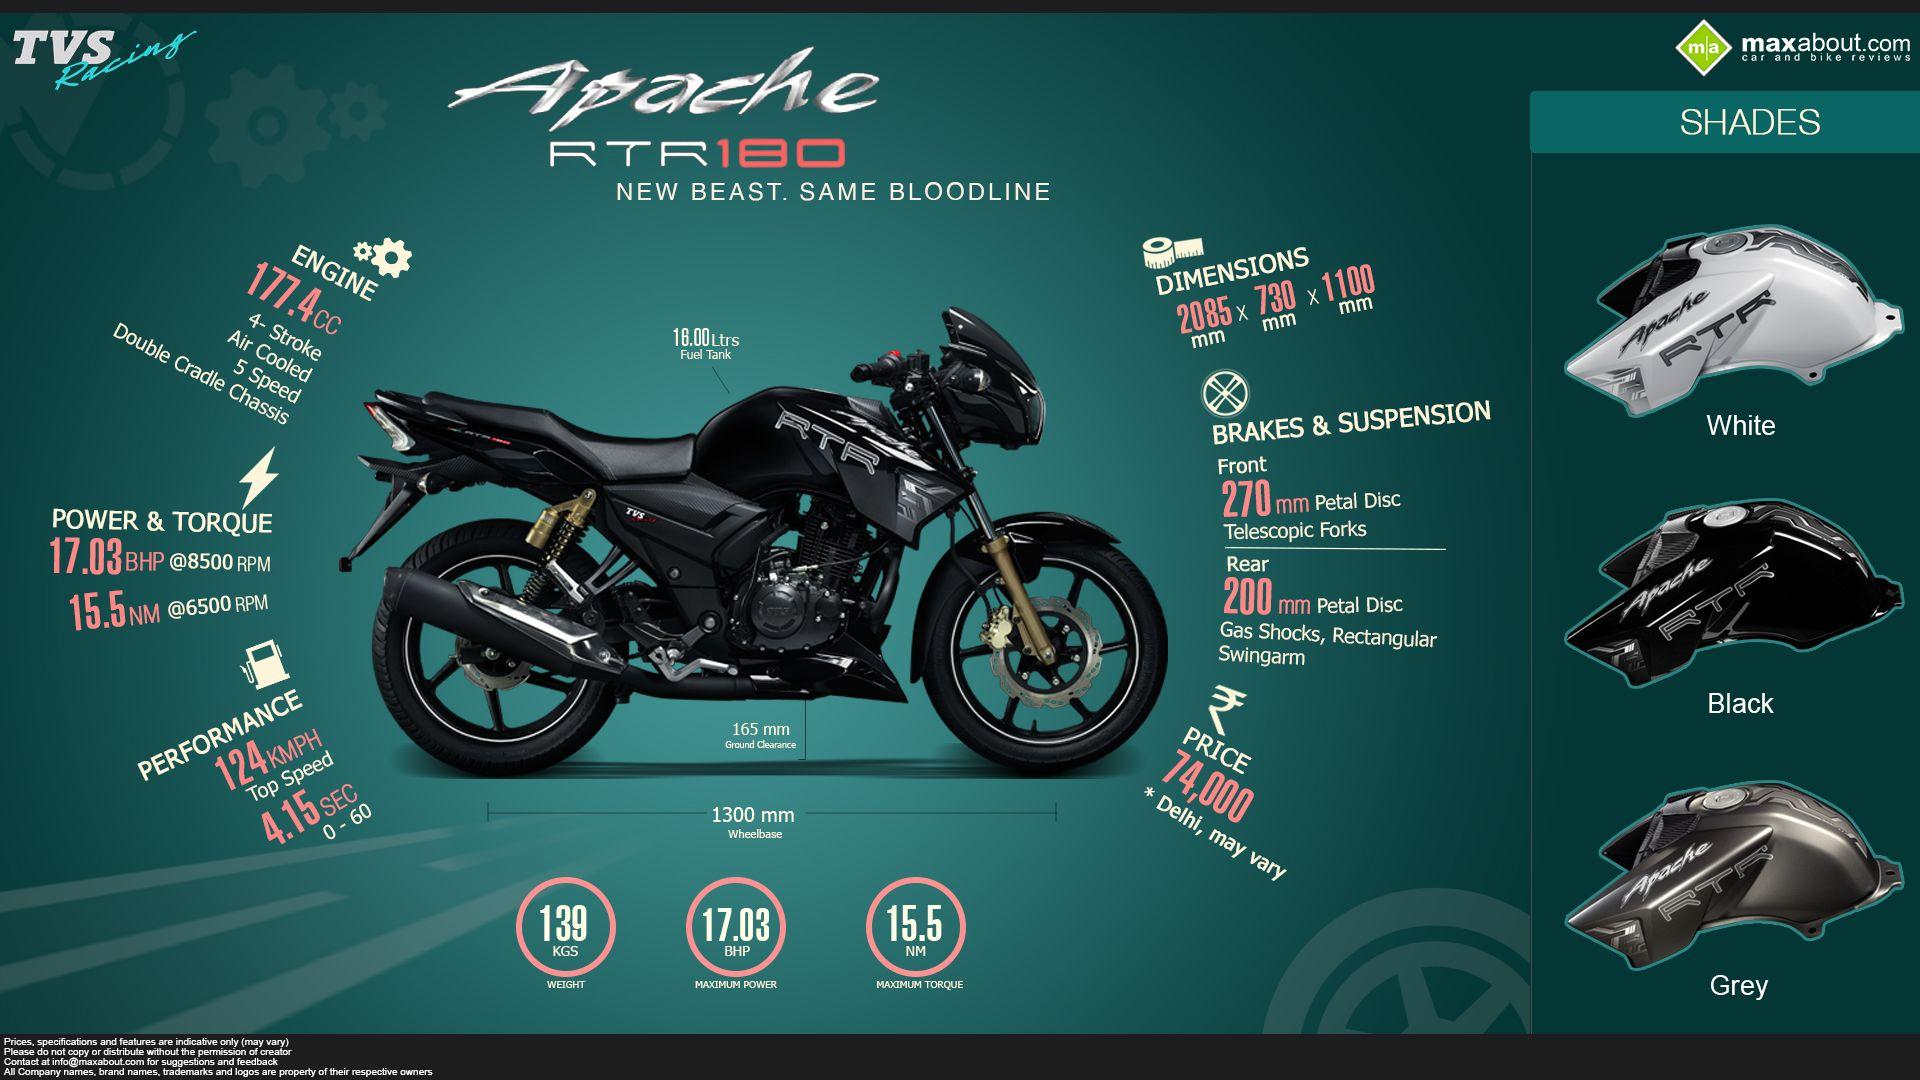 Apache RTR 180 Wallpapers - Wallpaper Cave